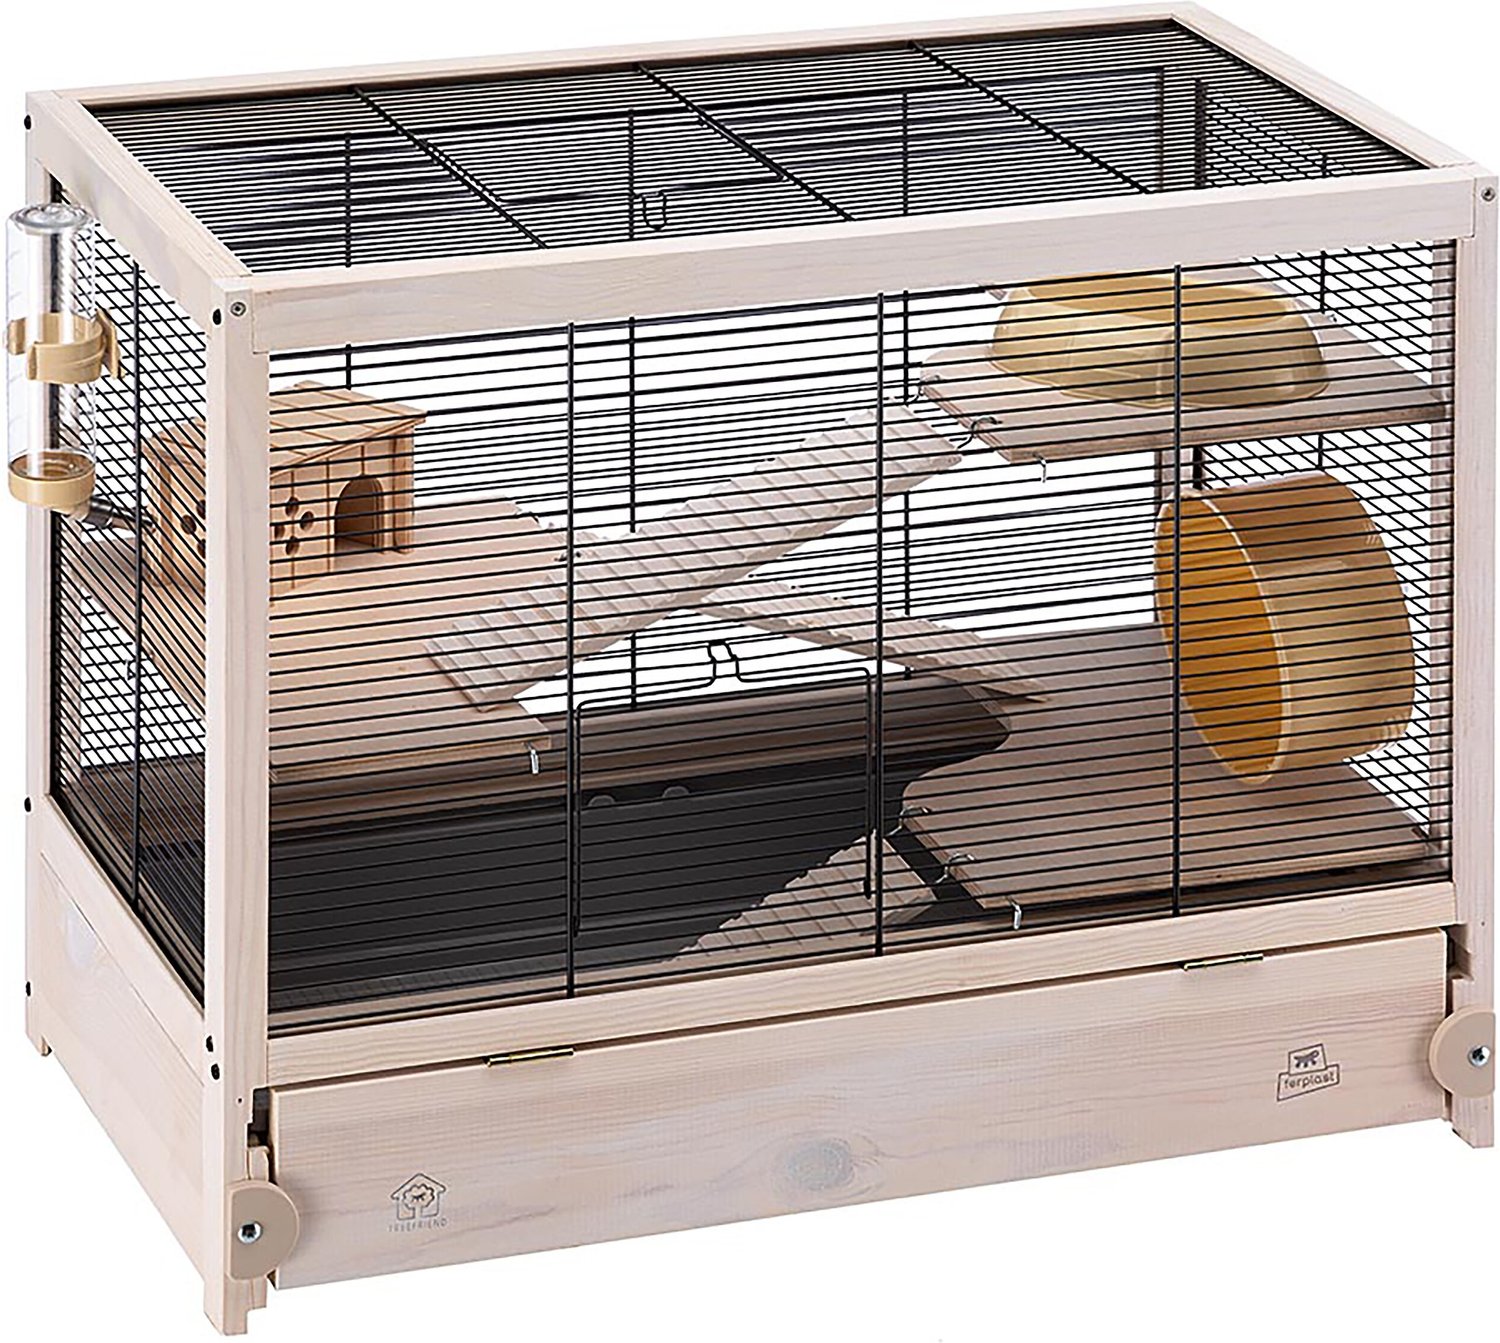 hamster cage